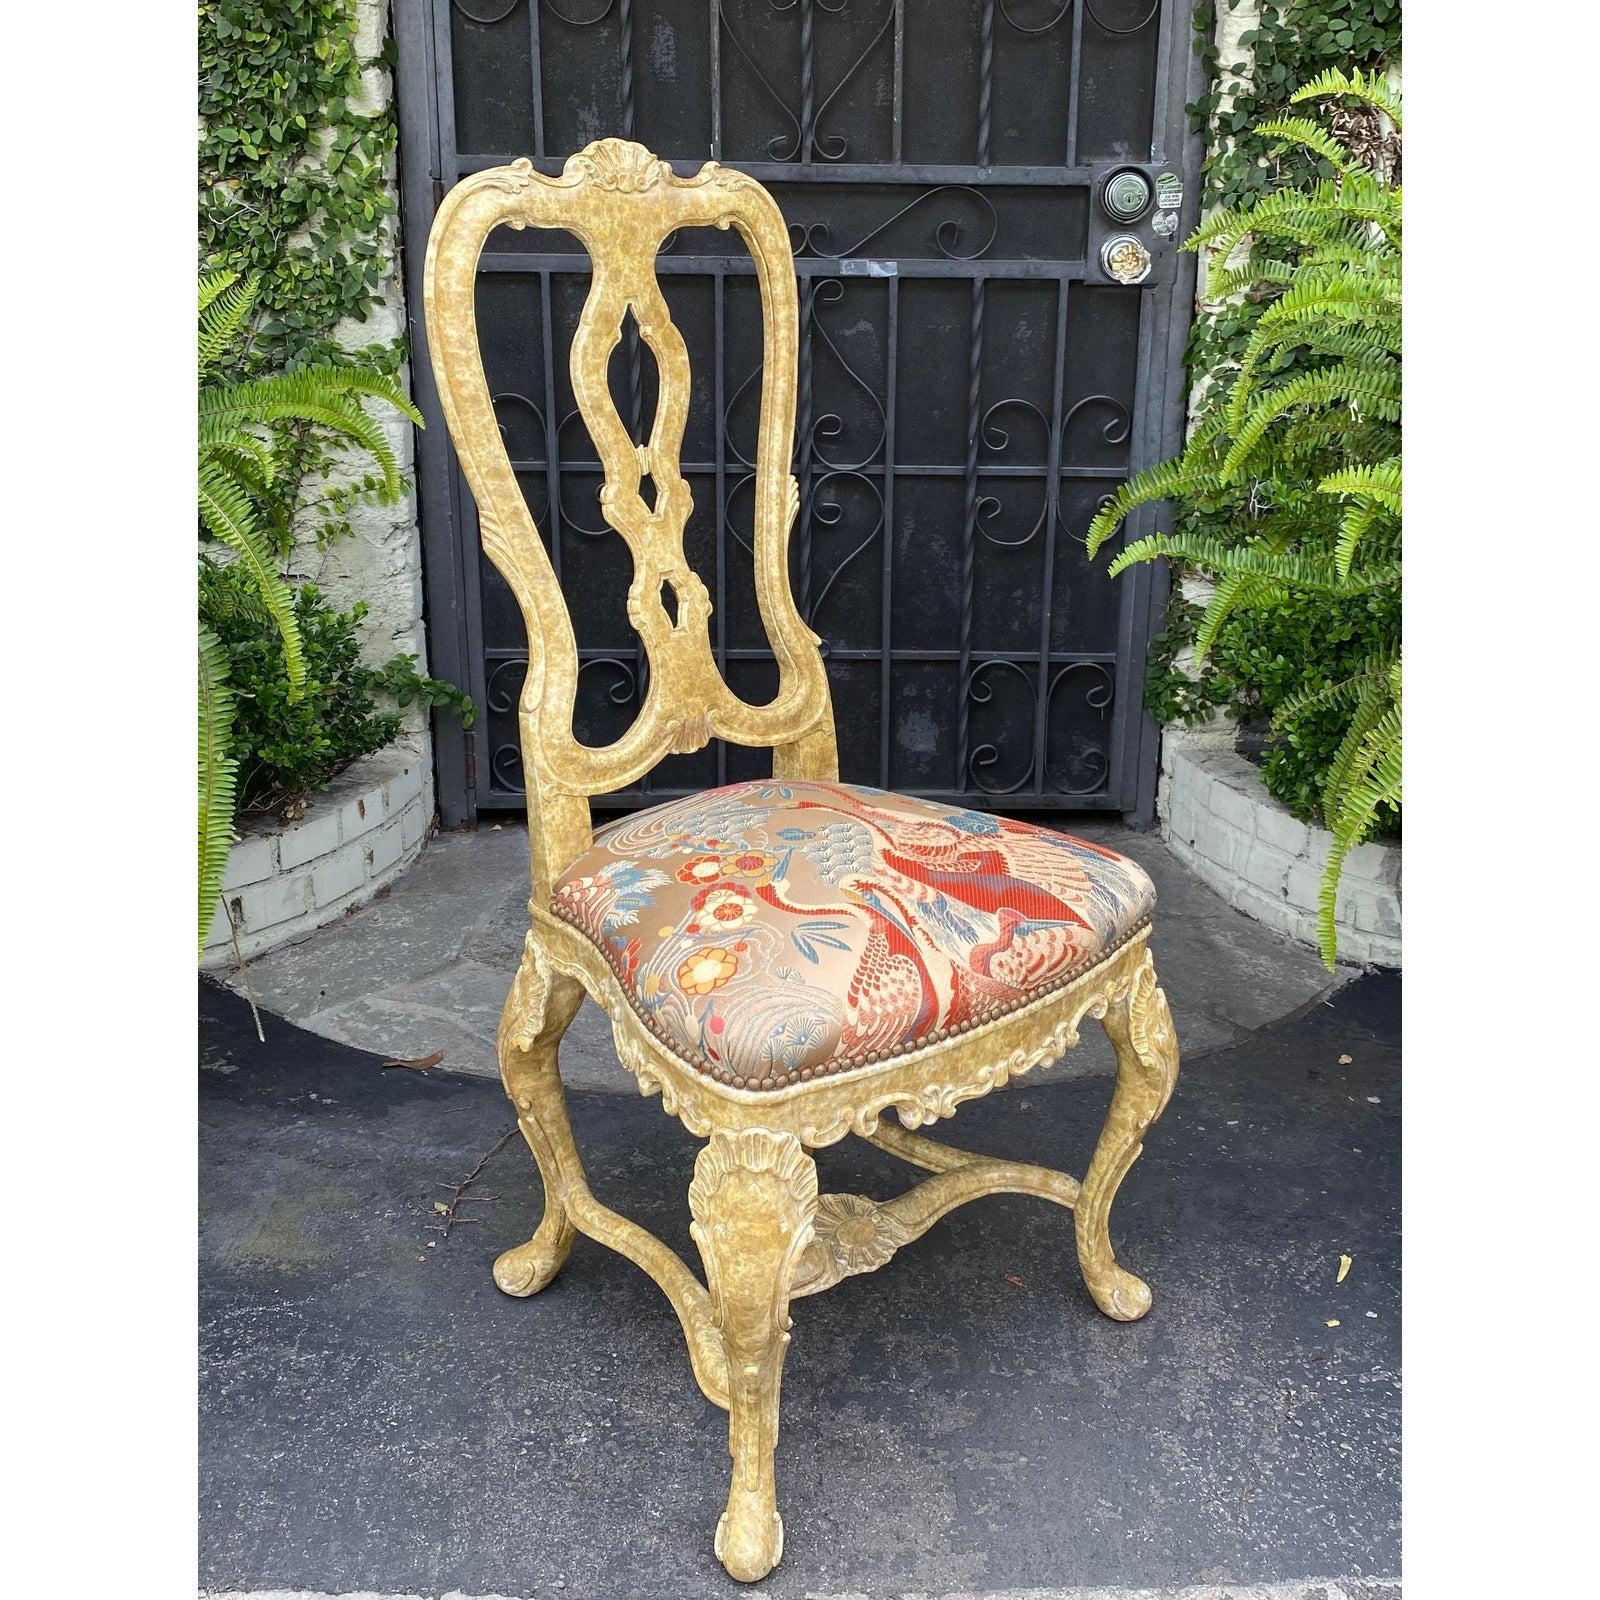 Pair of Antique Venetian side chairs W Scalamandre silk lampas with birds

Additional information:
Materials: Silk, Wood
Color: Tan
Period: Early 20th Century
Place of Origin: Italy
Styles: Italian
Number of Seats: 2
Item Type: Vintage,